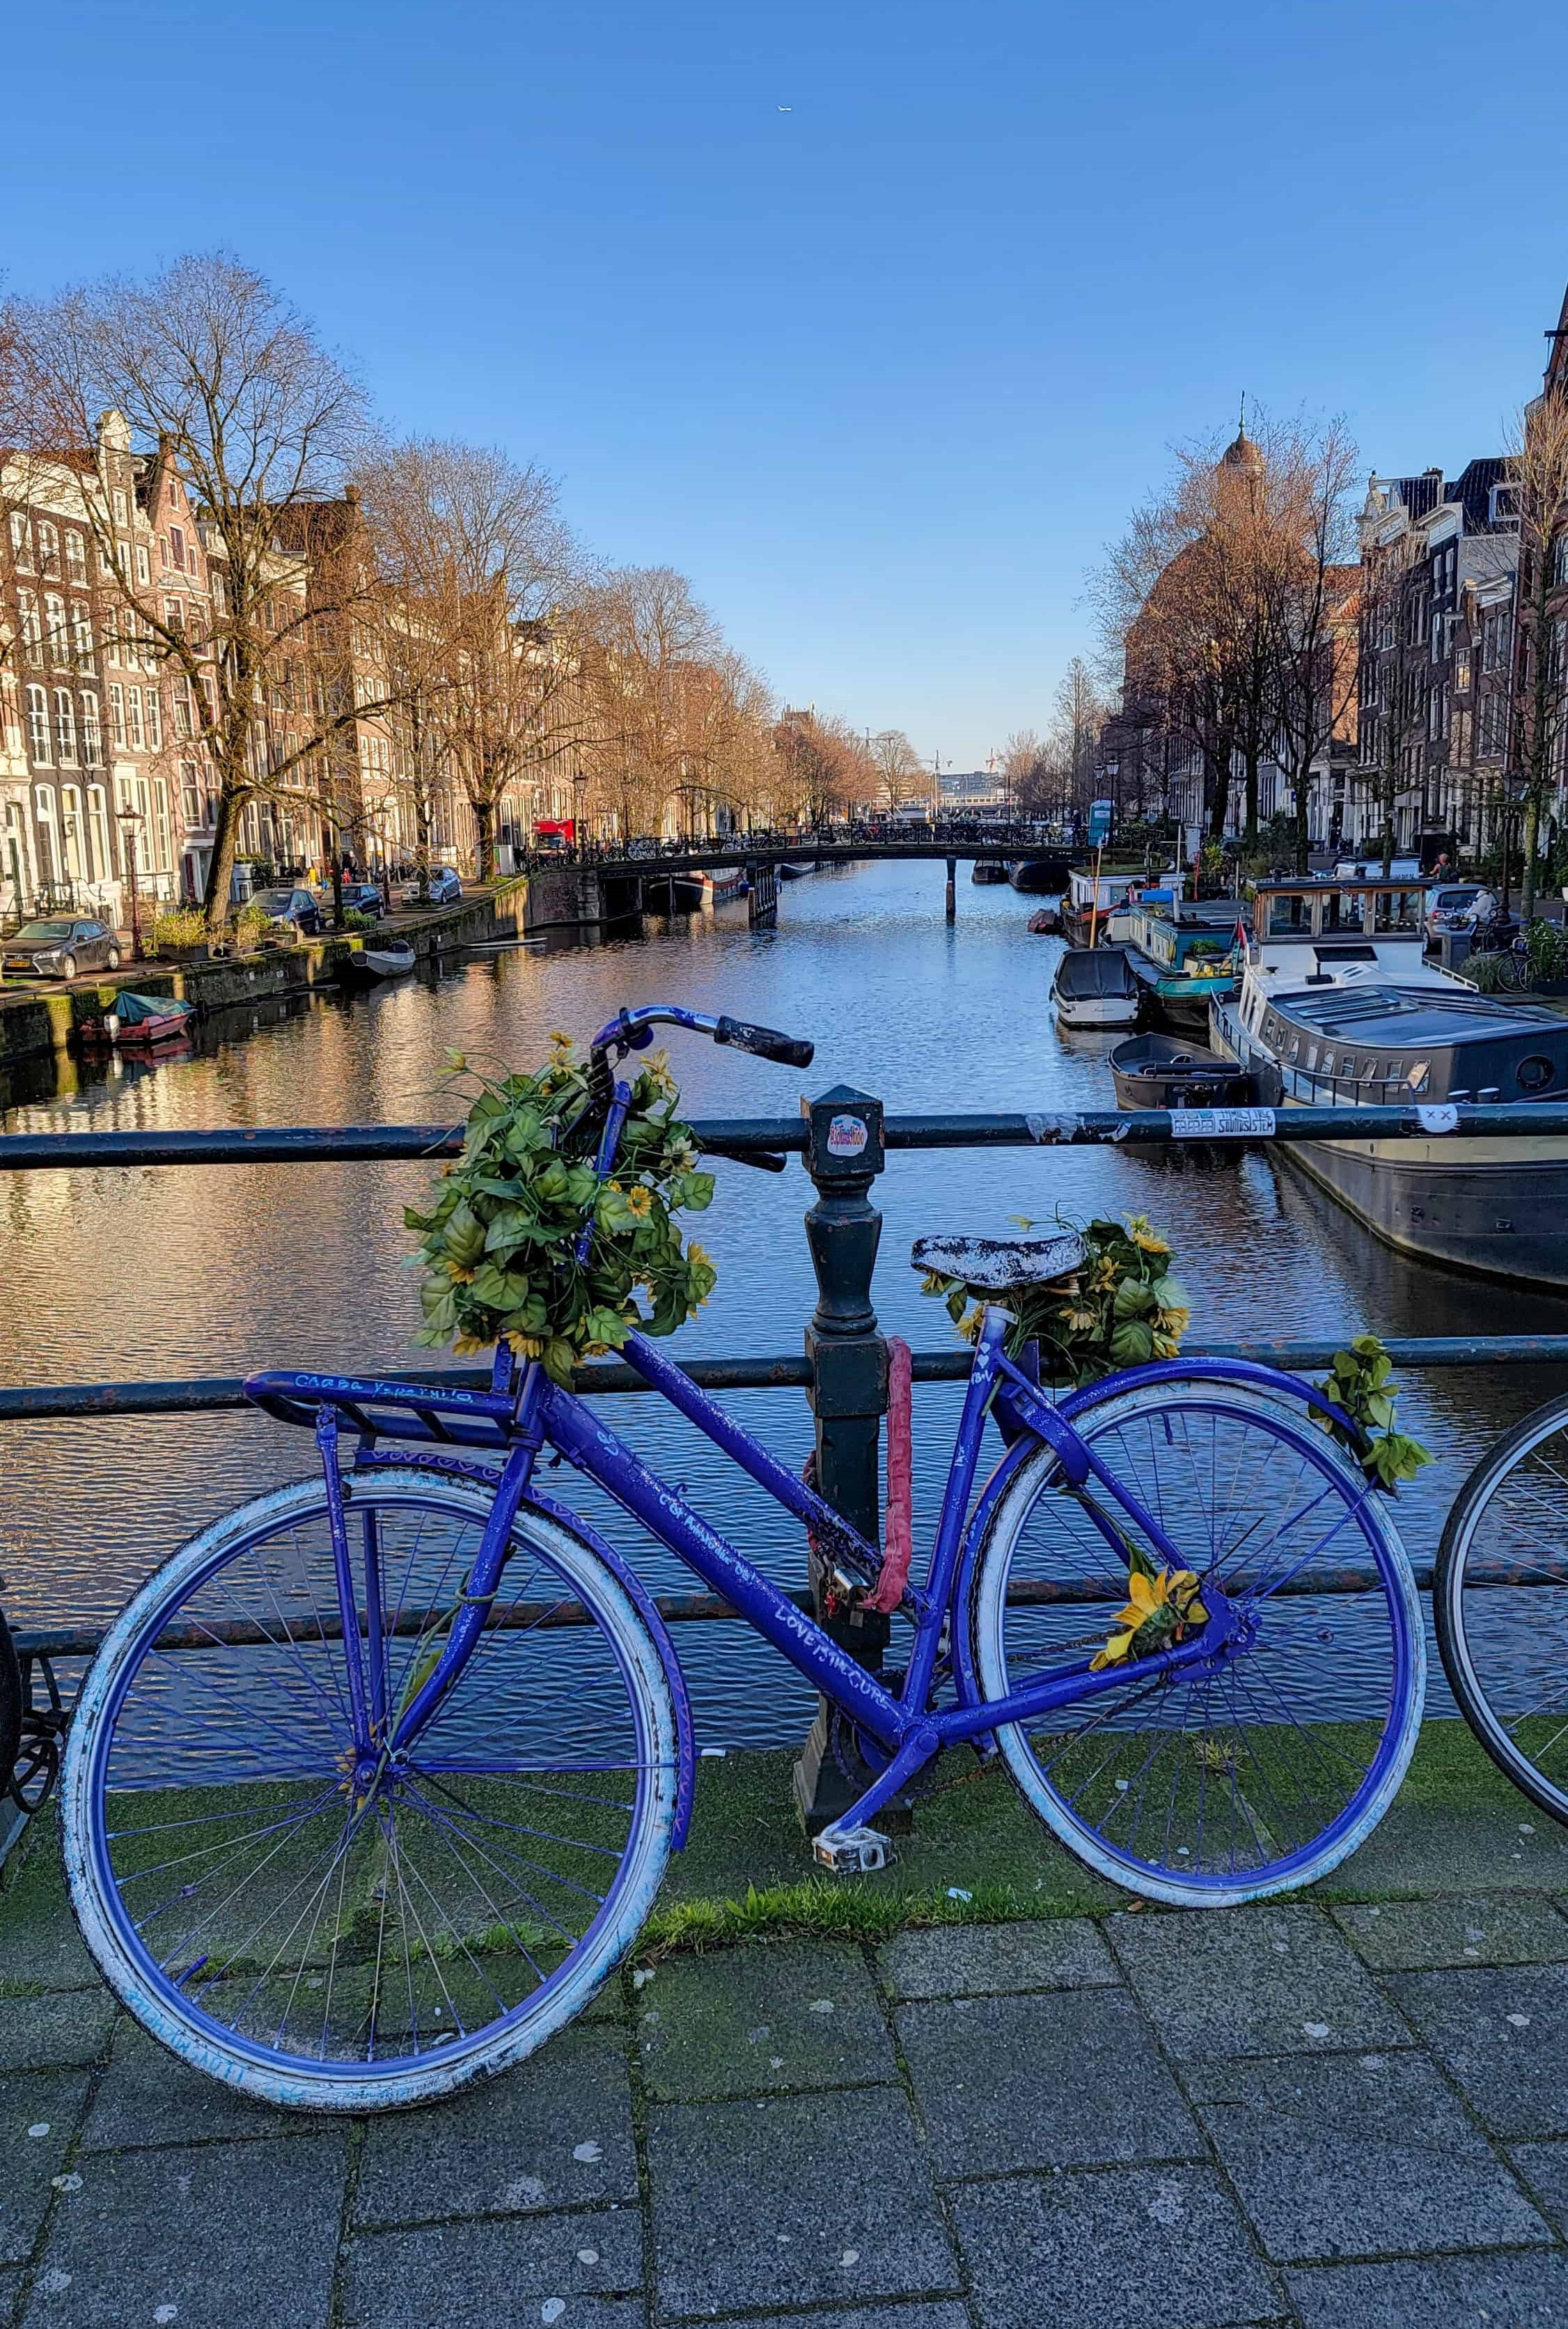 a bicycle and a canal in amsterdam